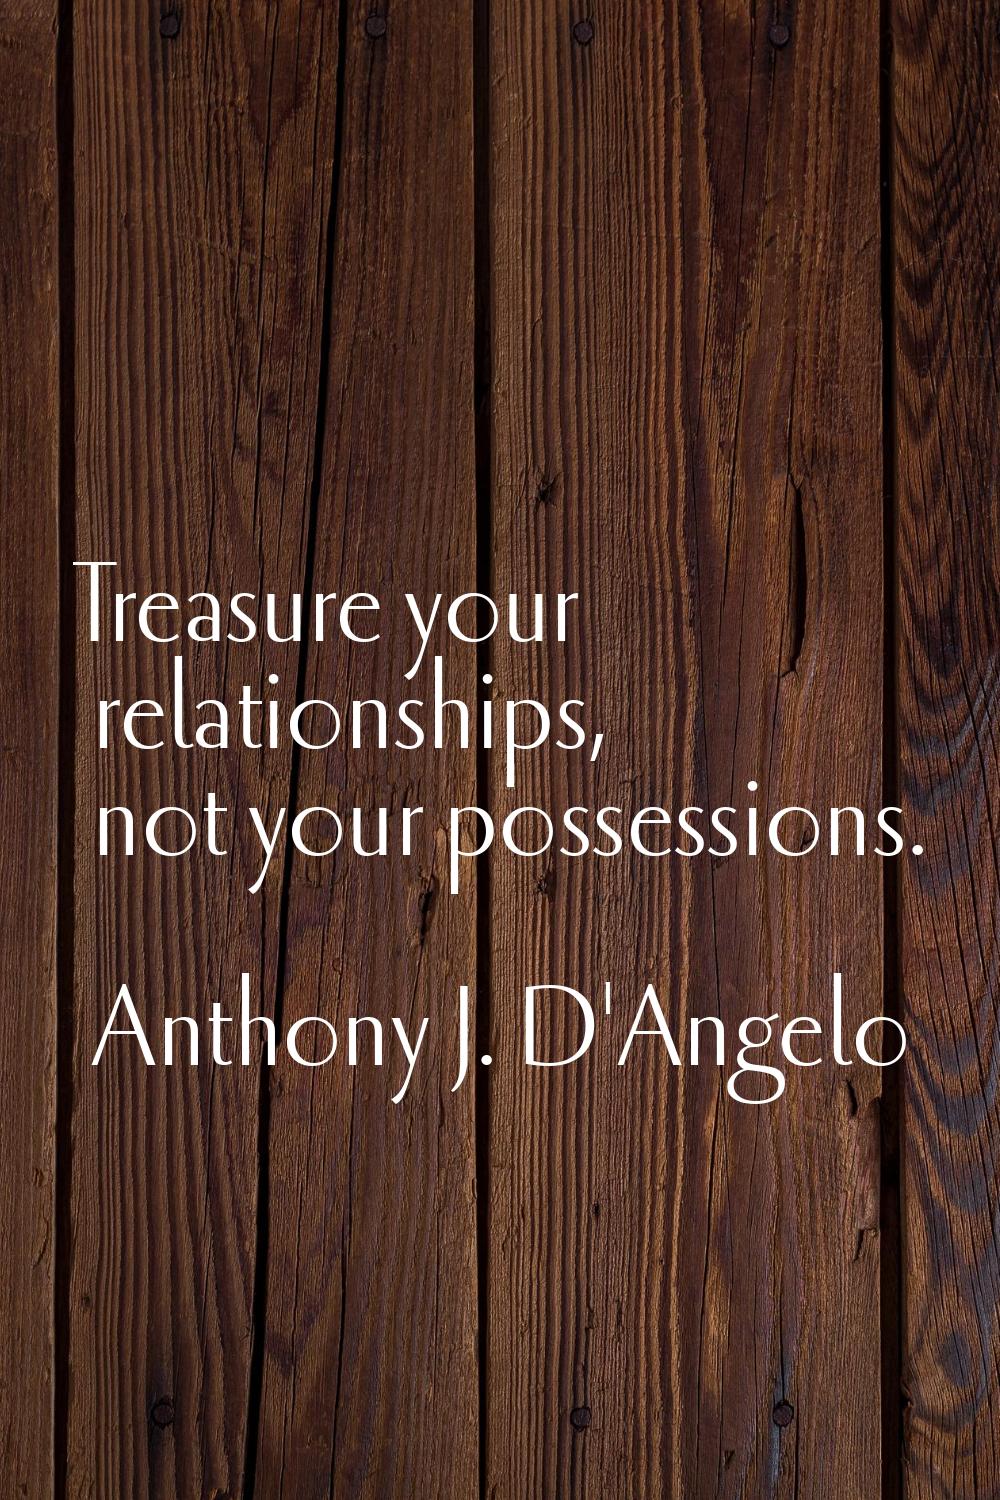 Treasure your relationships, not your possessions.